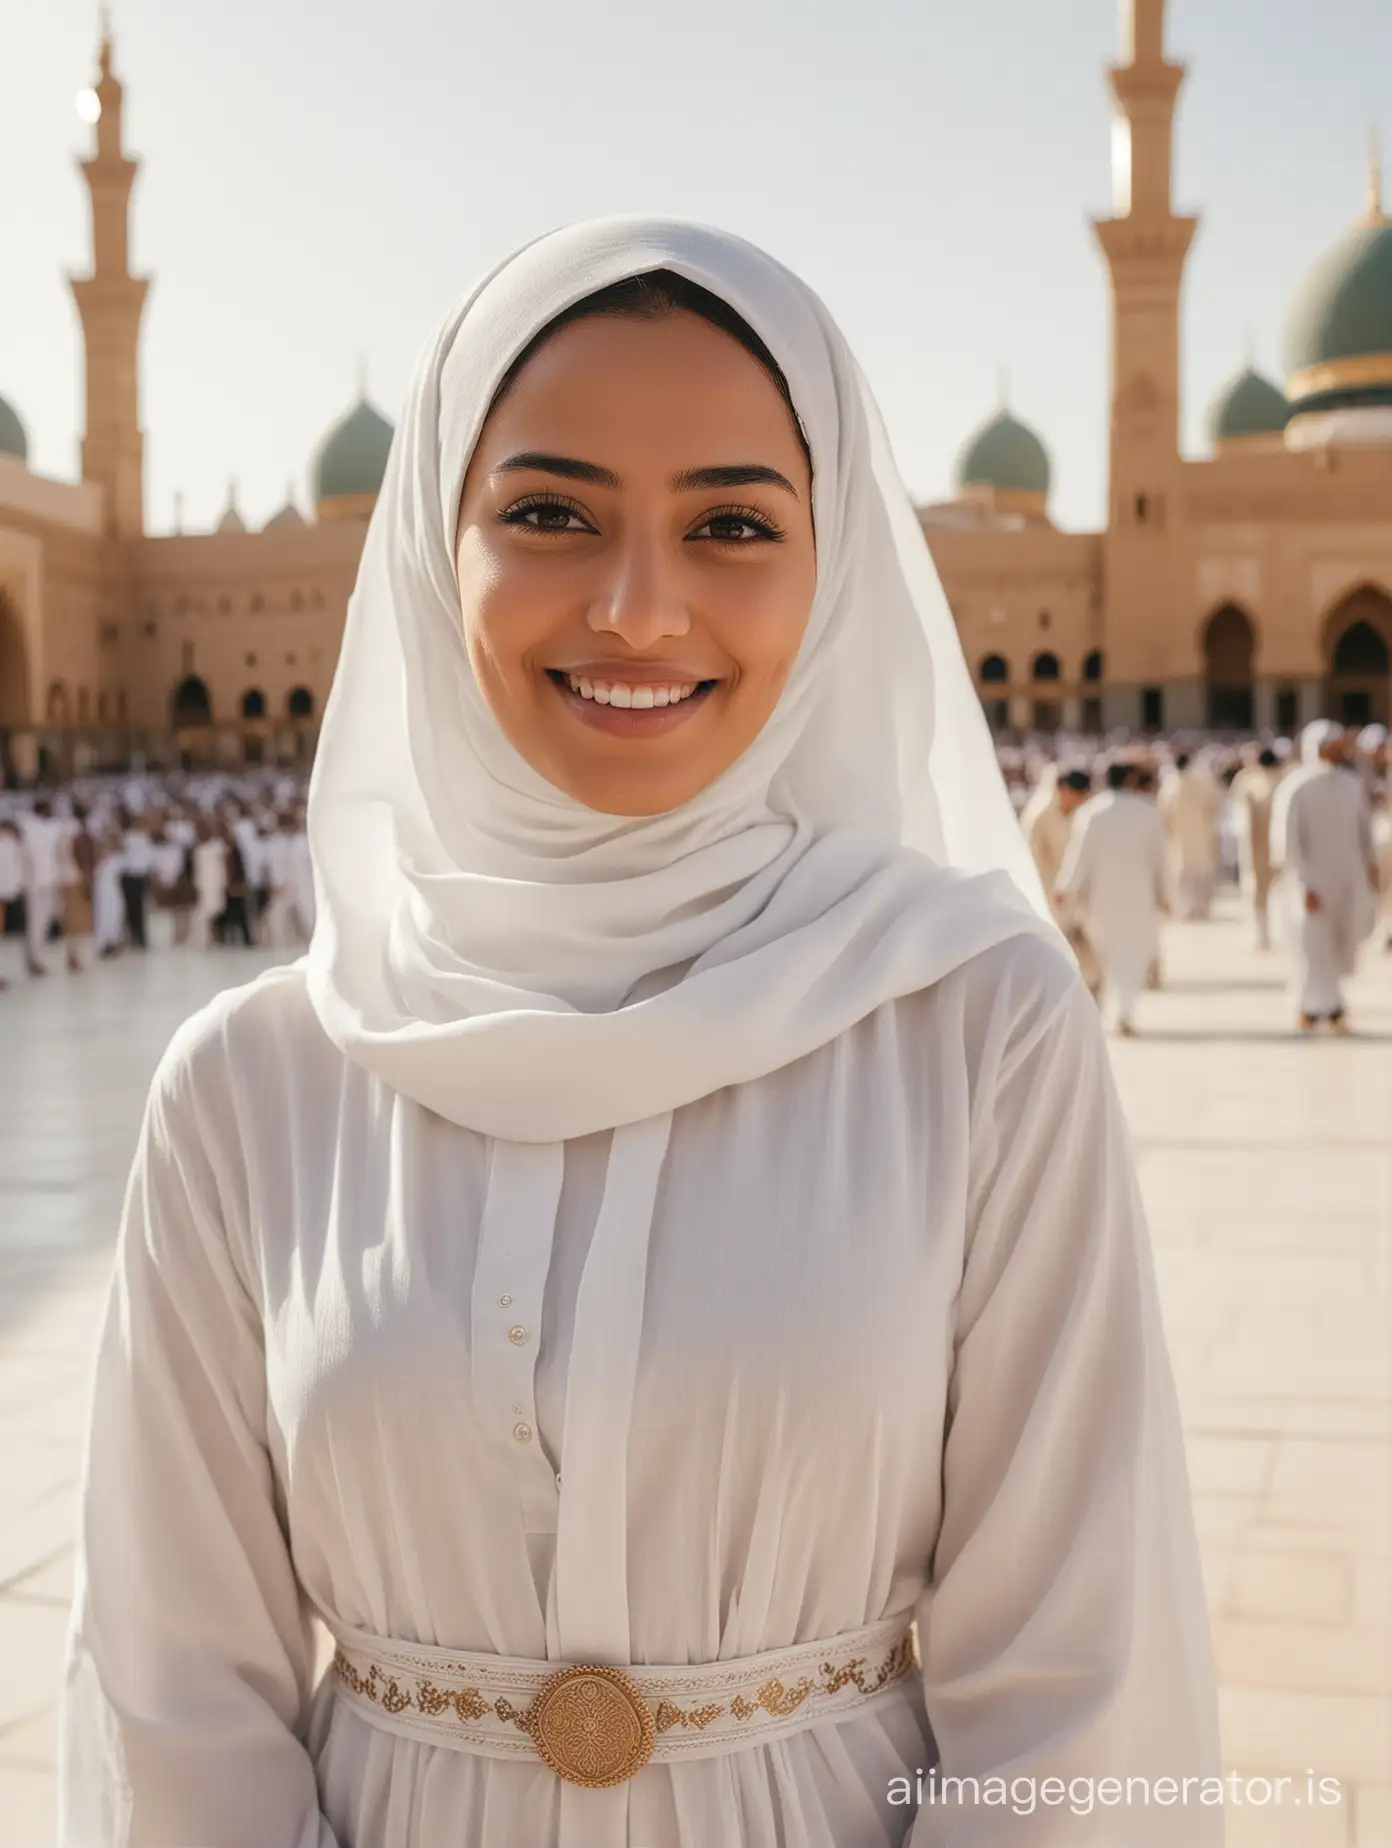 Full body photo of Muslim woman "25 years old, wearing hijab, wearing white robe, thin smile", soft natural lighting,--ar 23:32 --raw style,, with the background of the Kaaba, in the distance